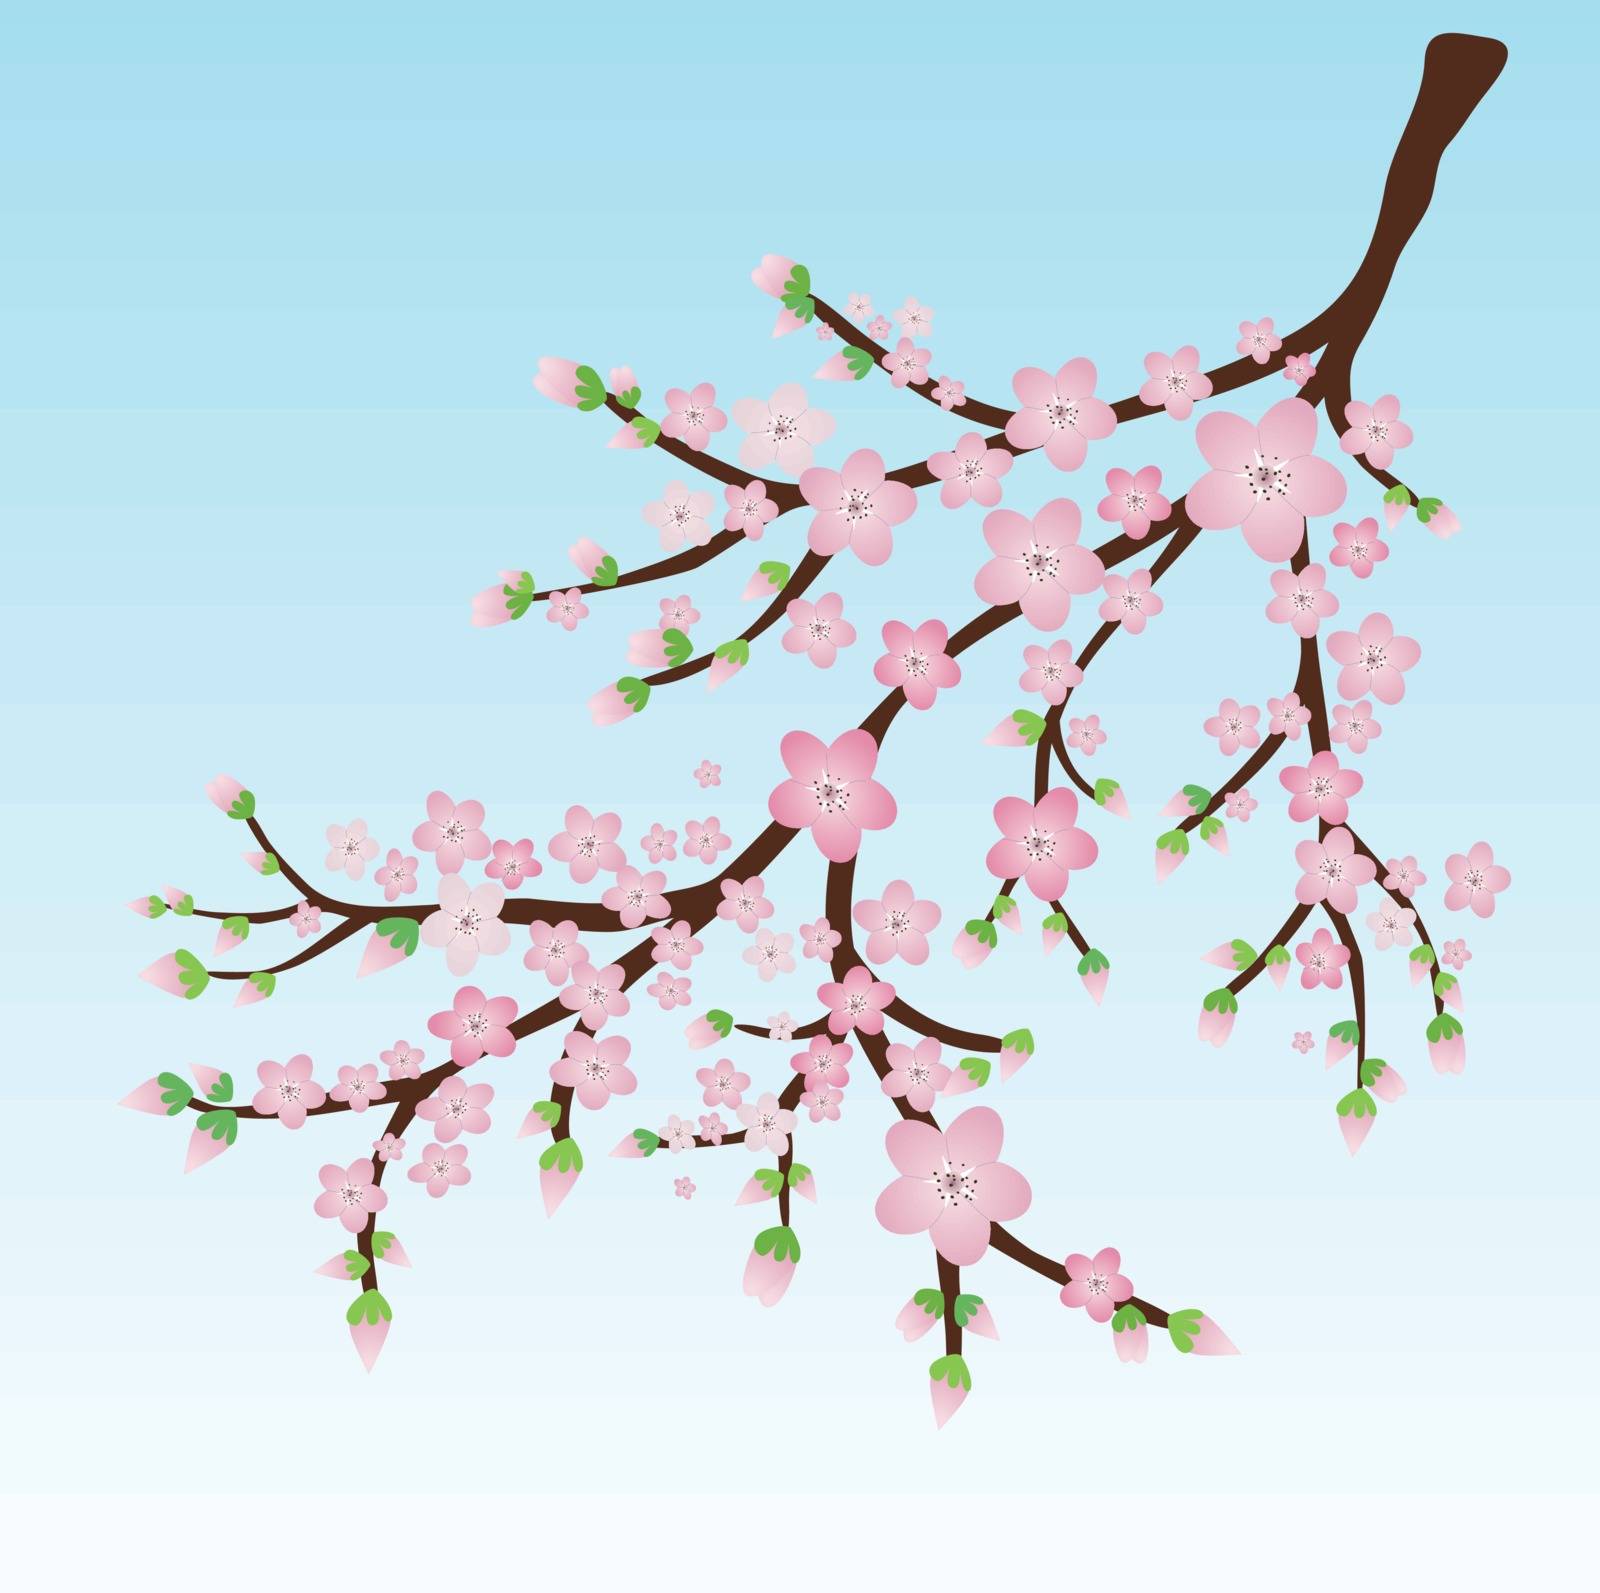 Branch with pink blossoms and flower butts by Bwise